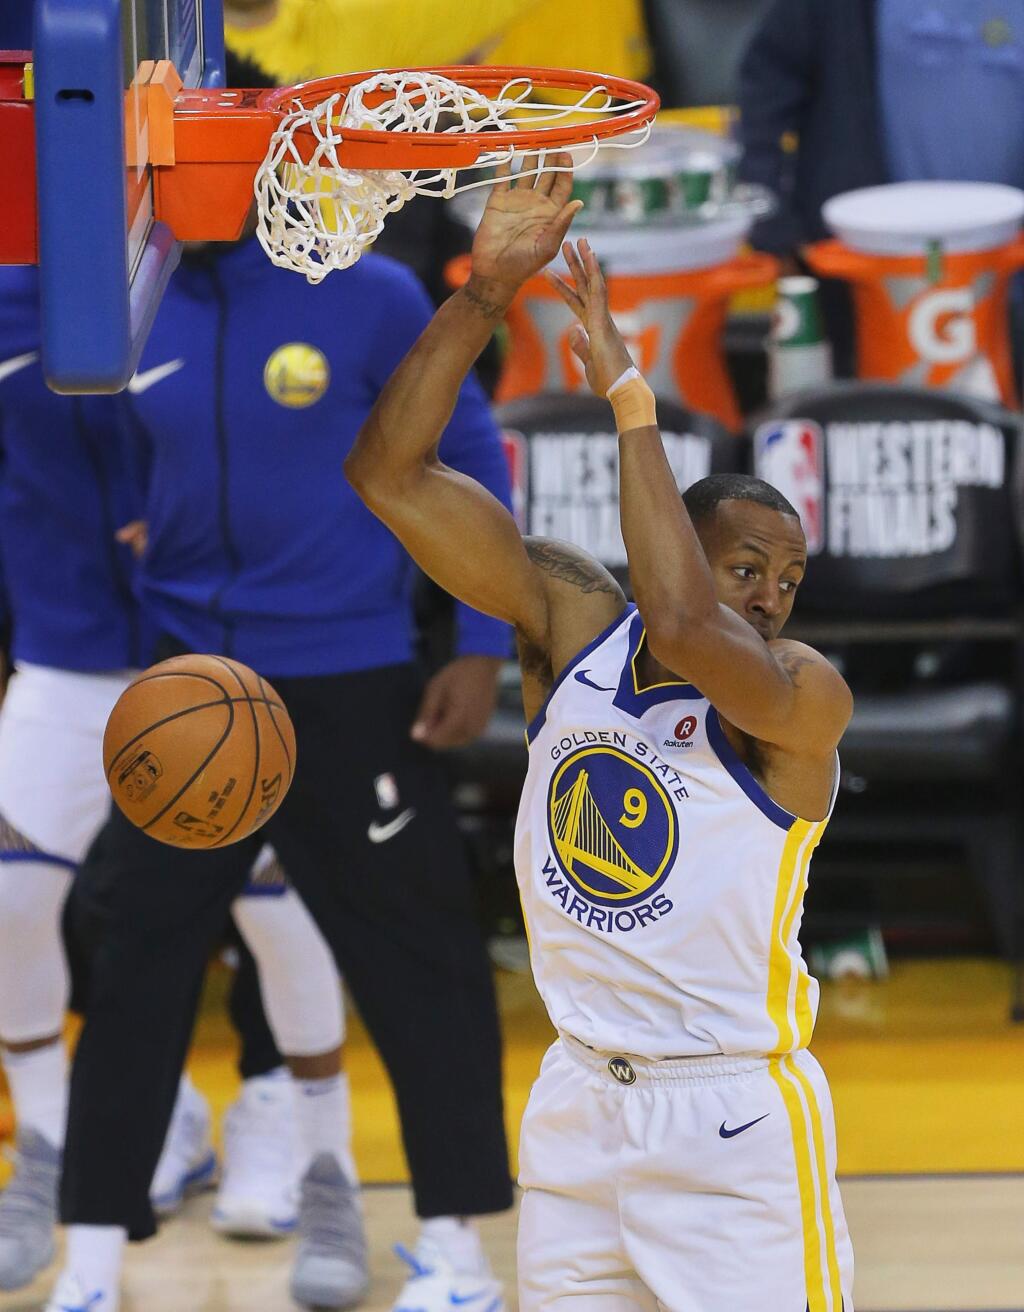 Golden State Warriors guard Andre Iguodala dunks the ball against the Houston Rockets, during their game in Oakland on Sunday, May 20, 2018. (Christopher Chung/ The Press Democrat)